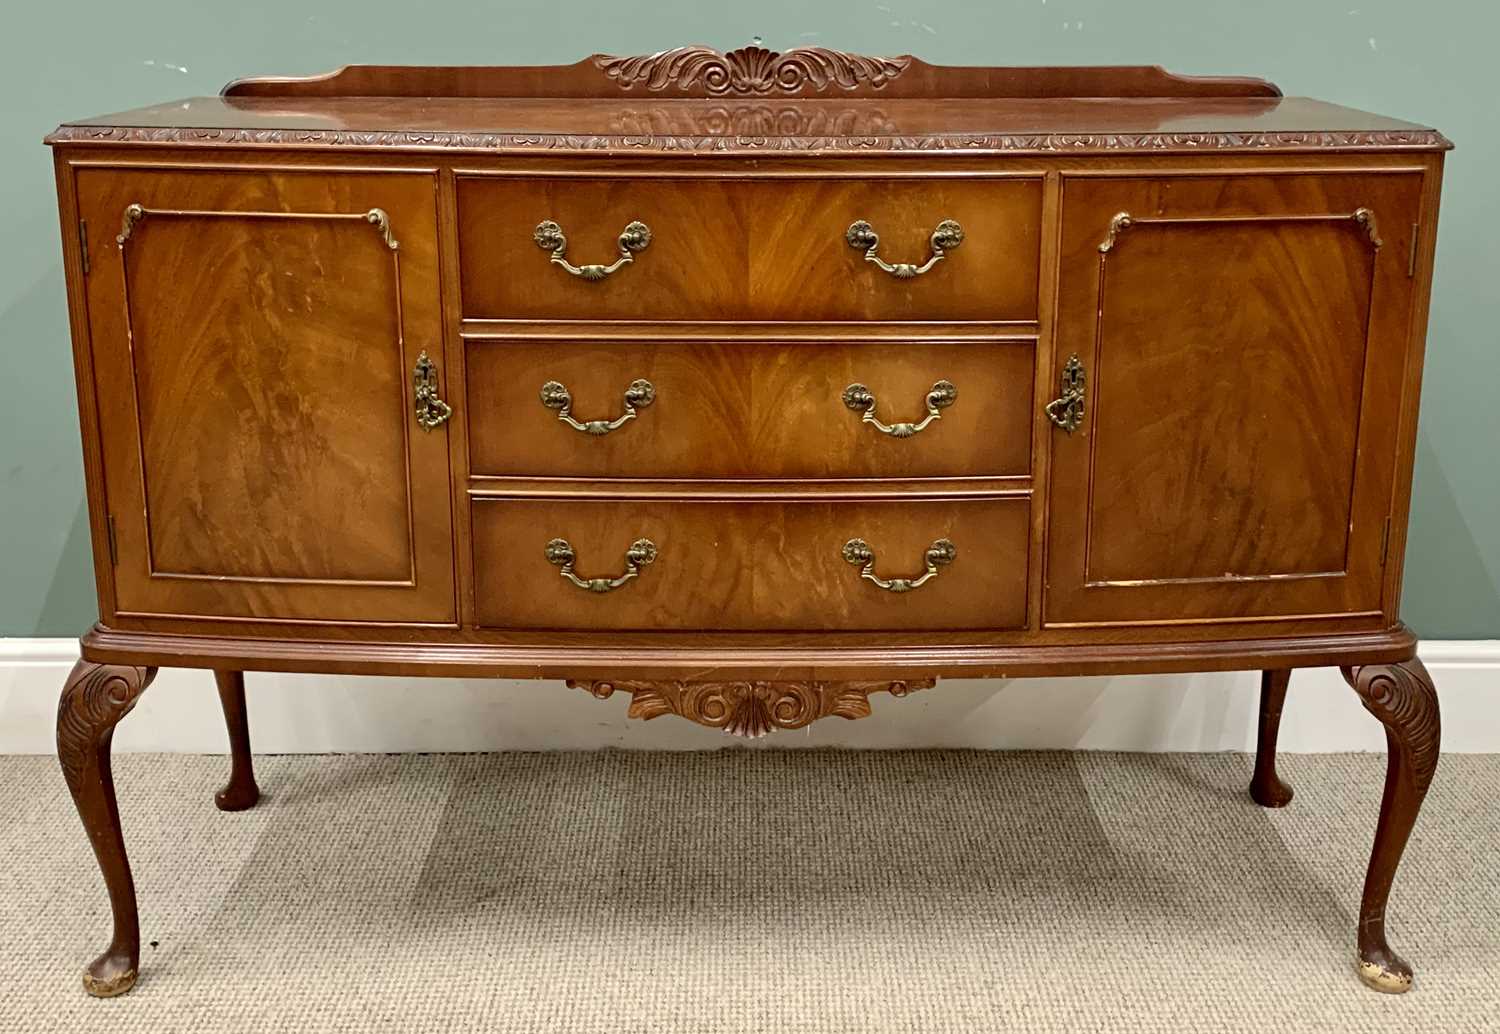 MAHOGANY RAILBACK SIDEBOARD - 20th Century in Regency style with three central drawers and two